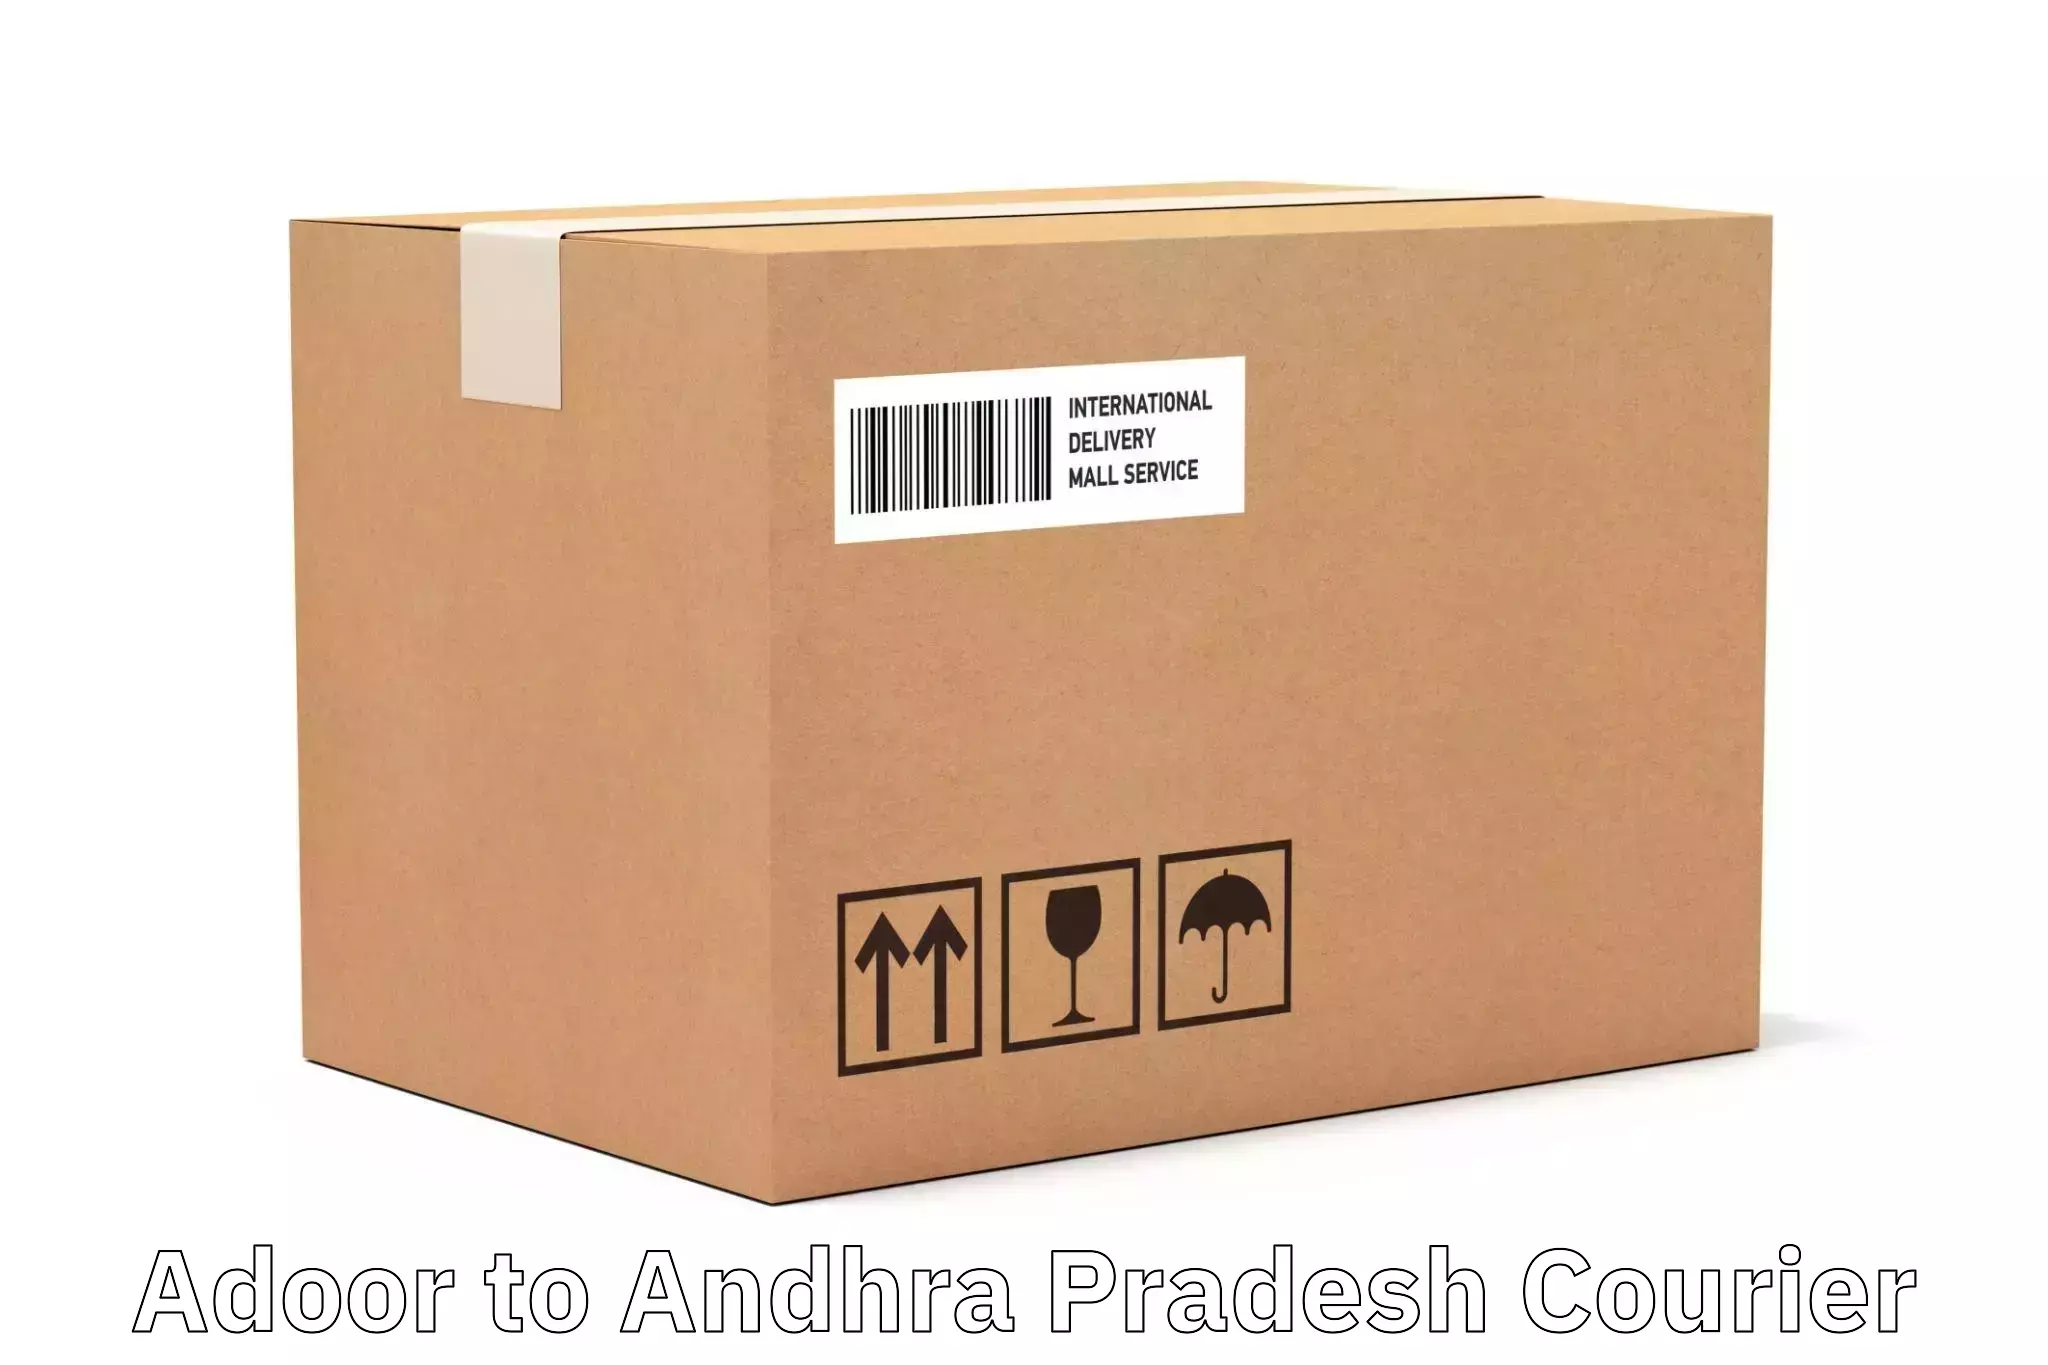 Business courier solutions Adoor to Visakhapatnam Port